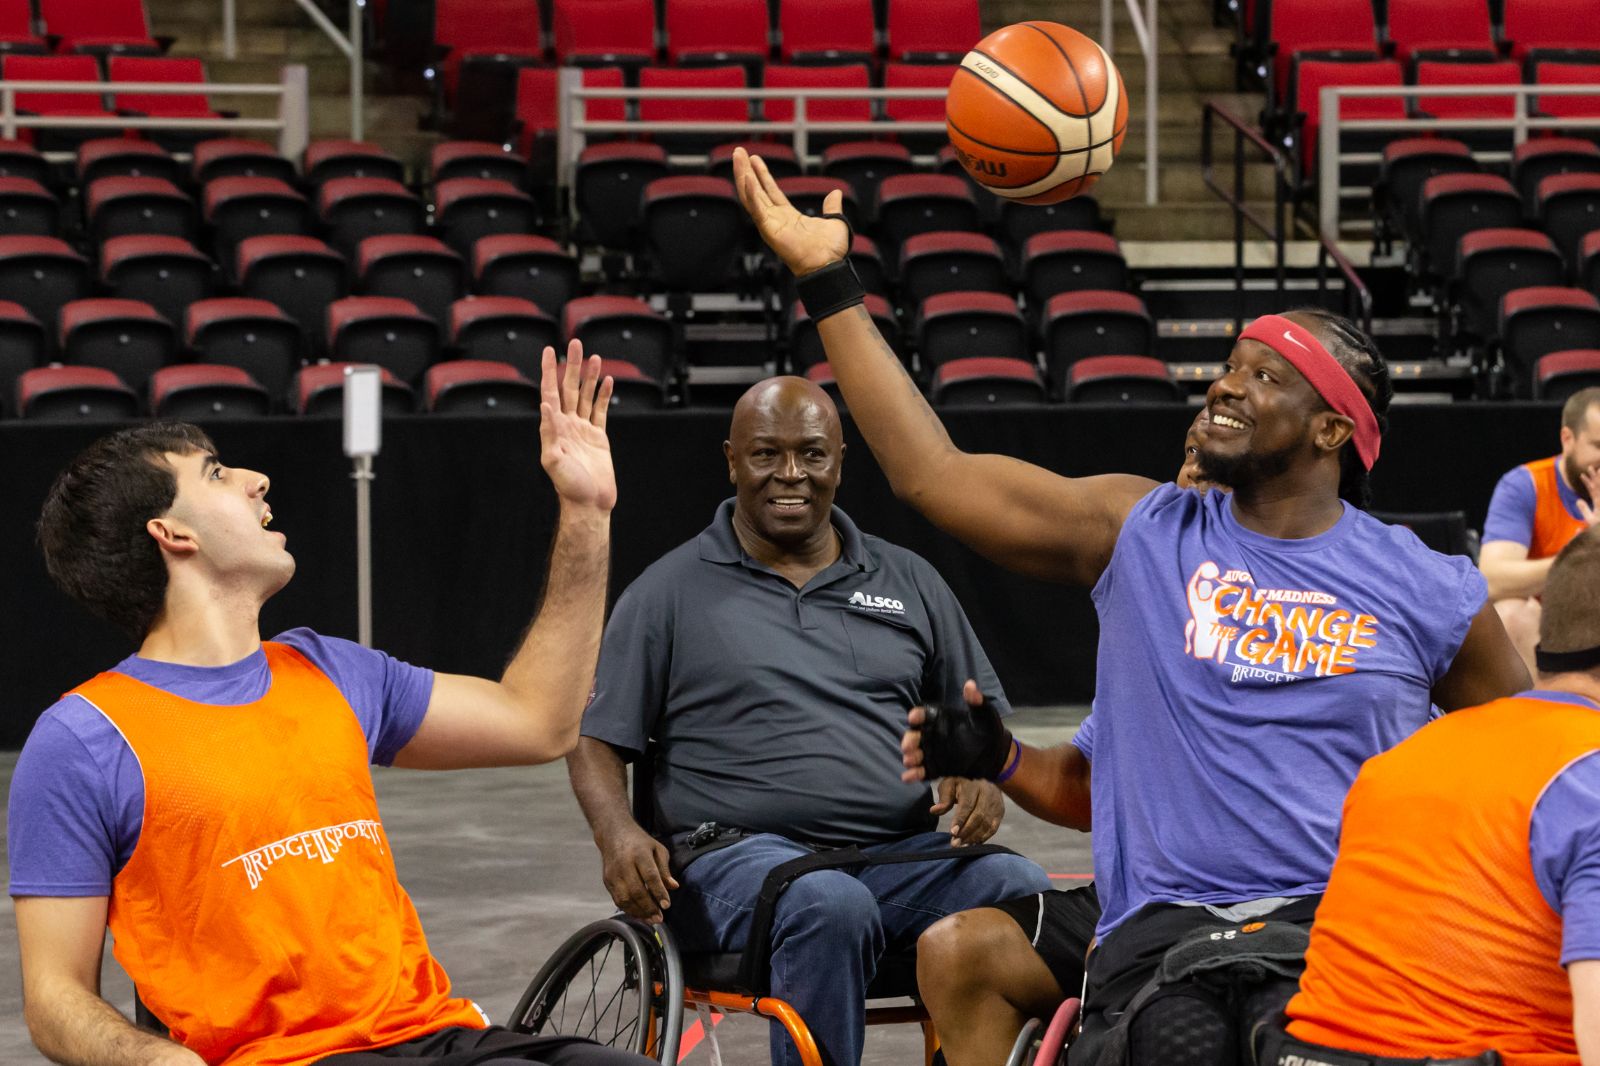 Two young men, one light skinned one dark skinned, in sports chairs compete for possession of a basketball.